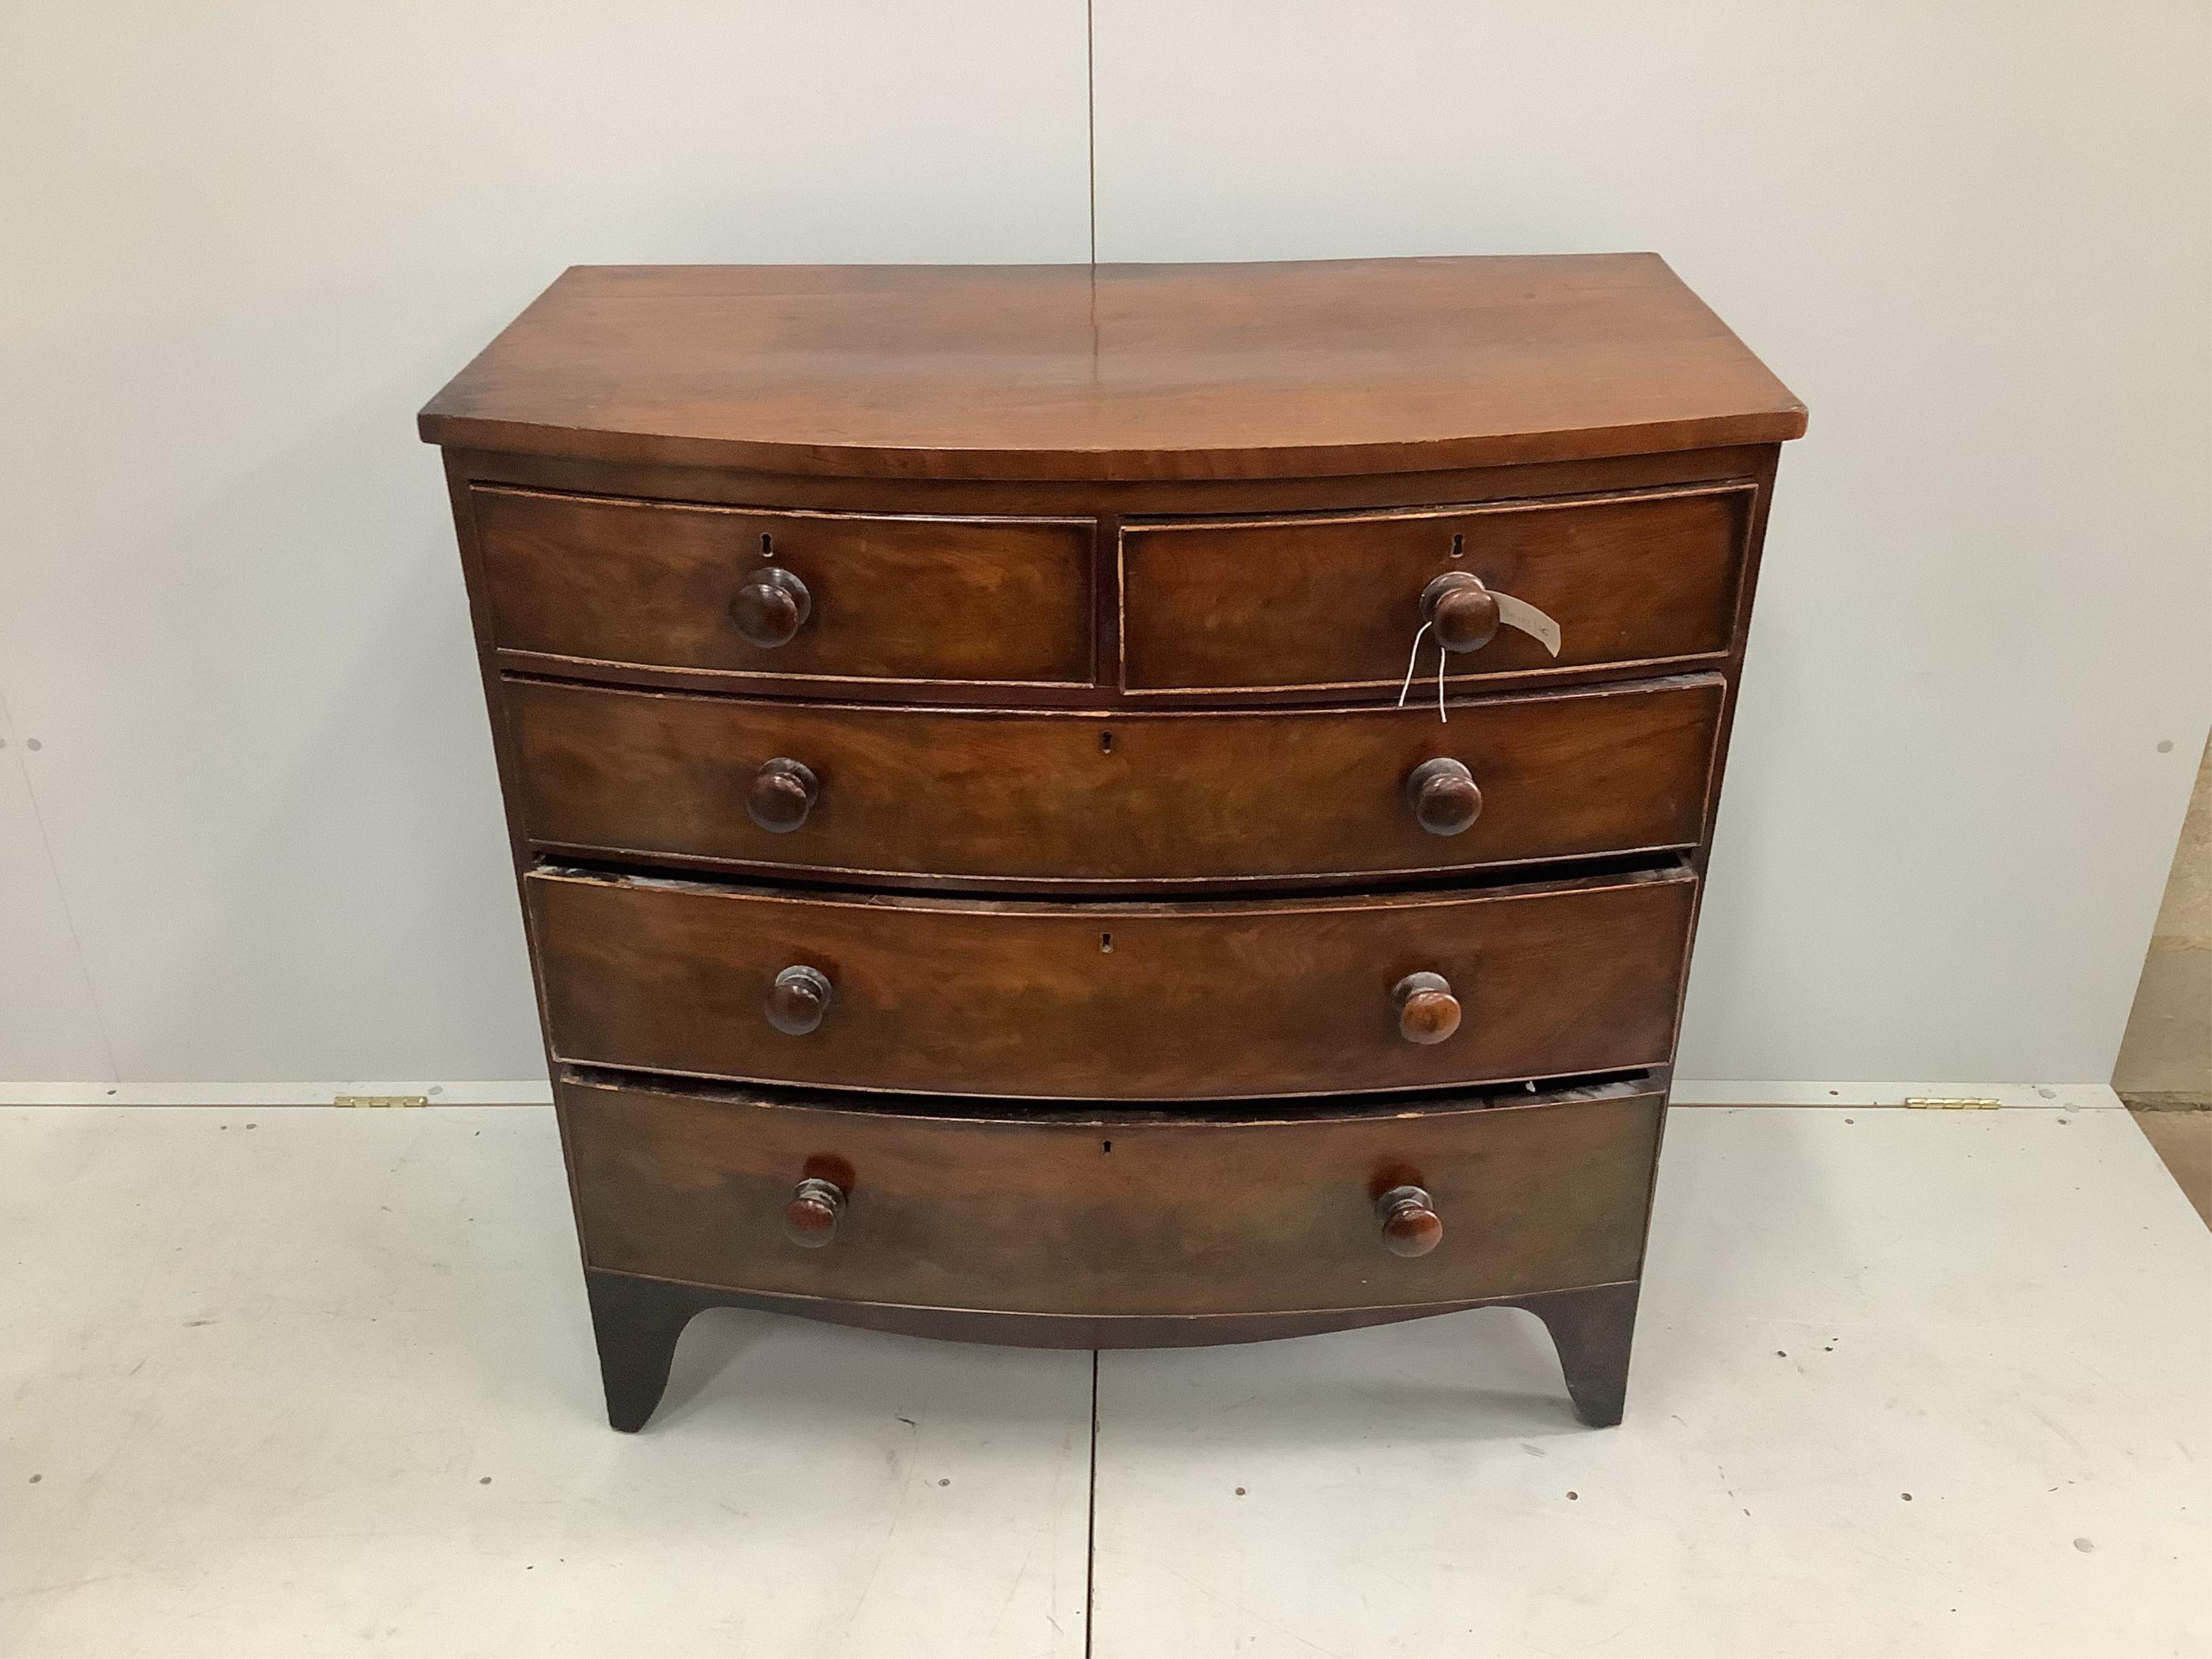 A Victorian mahogany bow front chest, width 100cm, depth 50cm, height 102cm. Condition - poor